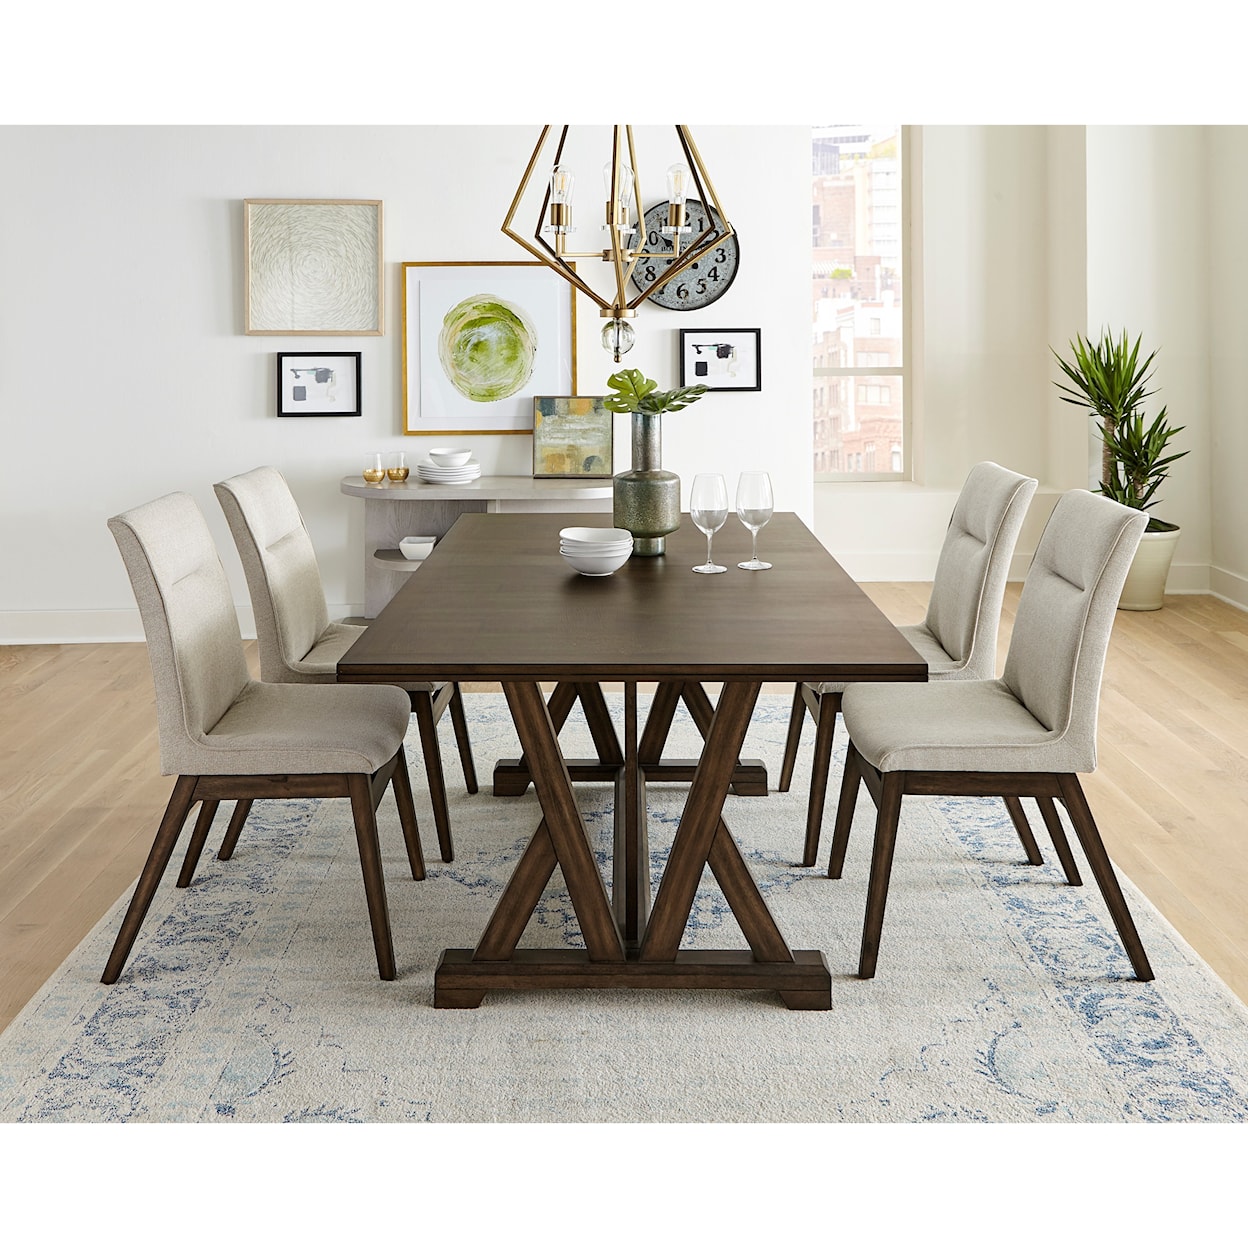 Carolina Chairs Mimosa 5-Piece Table and Chair Set